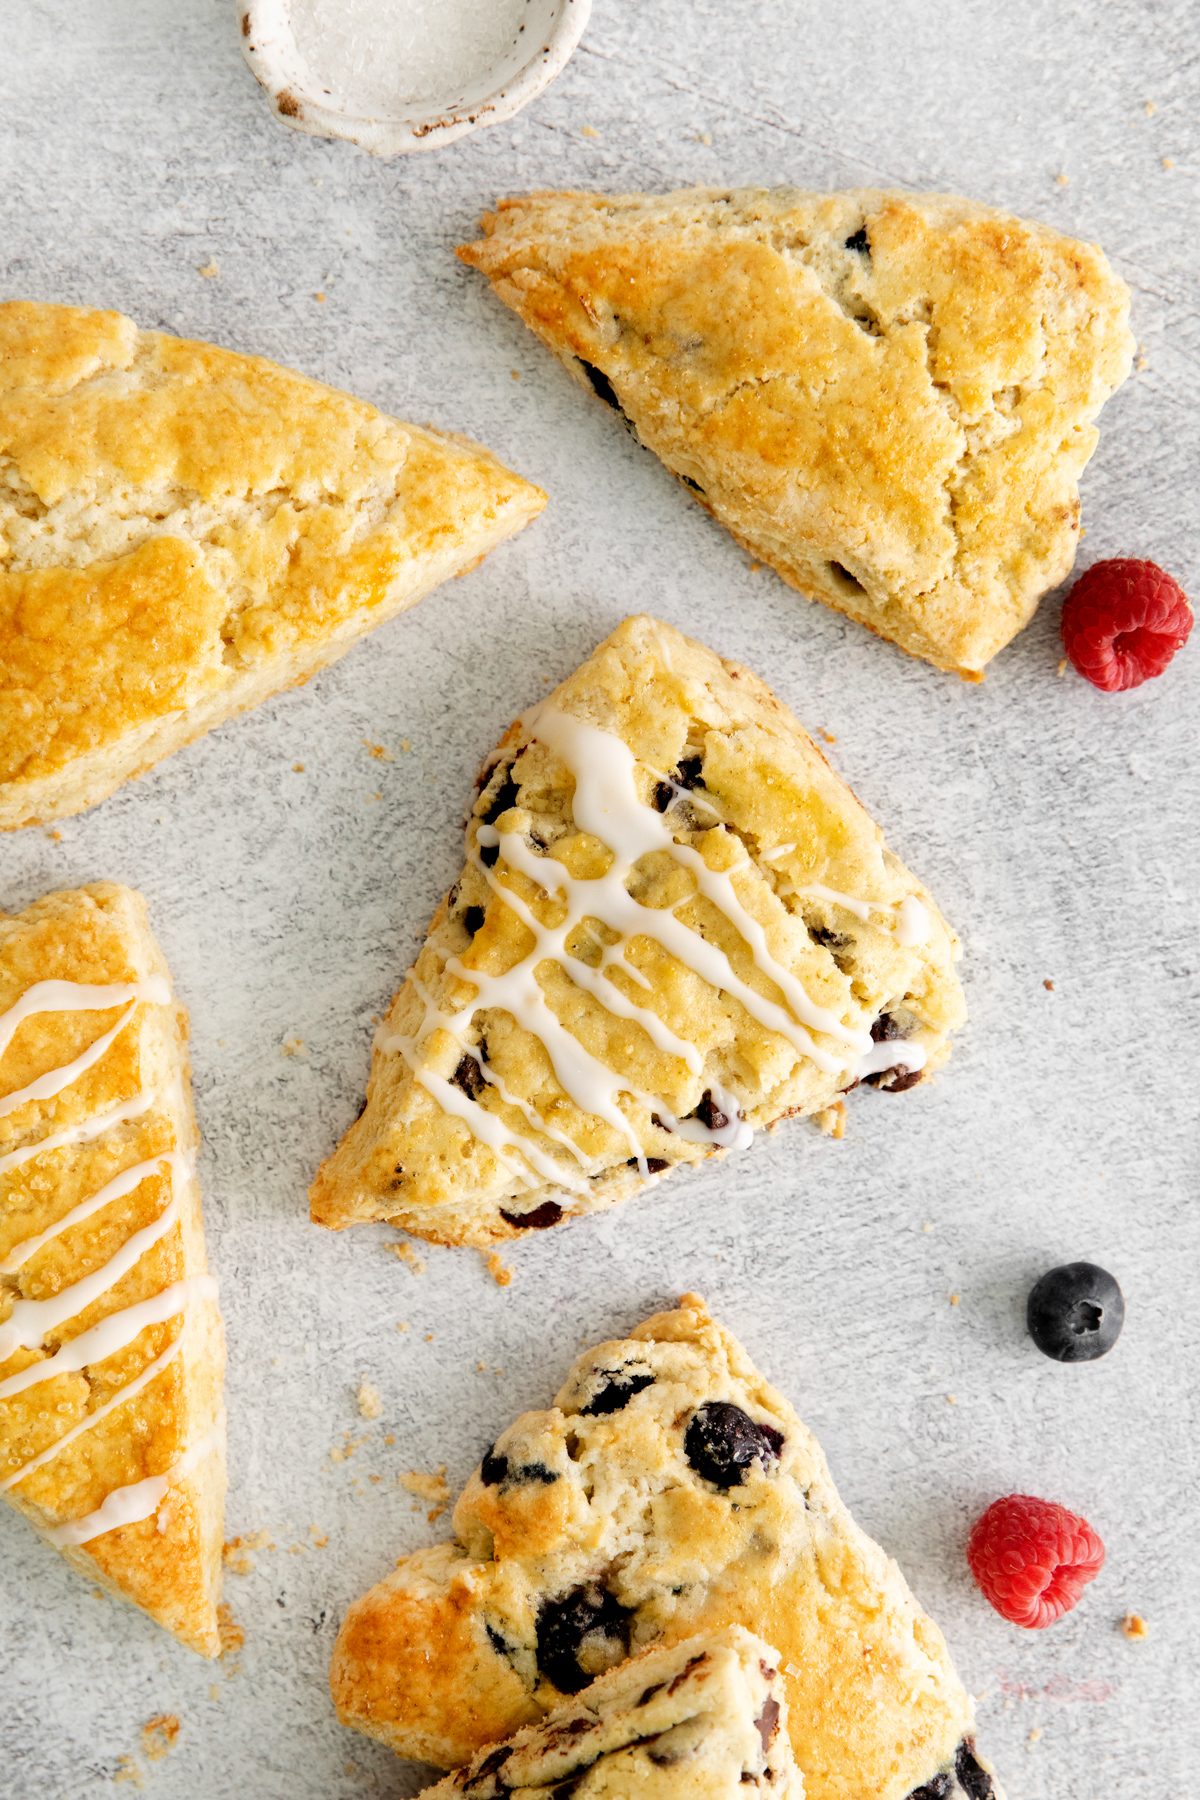 different flavors of scones, some with blueberries, some plain, some with icing drizzled on top